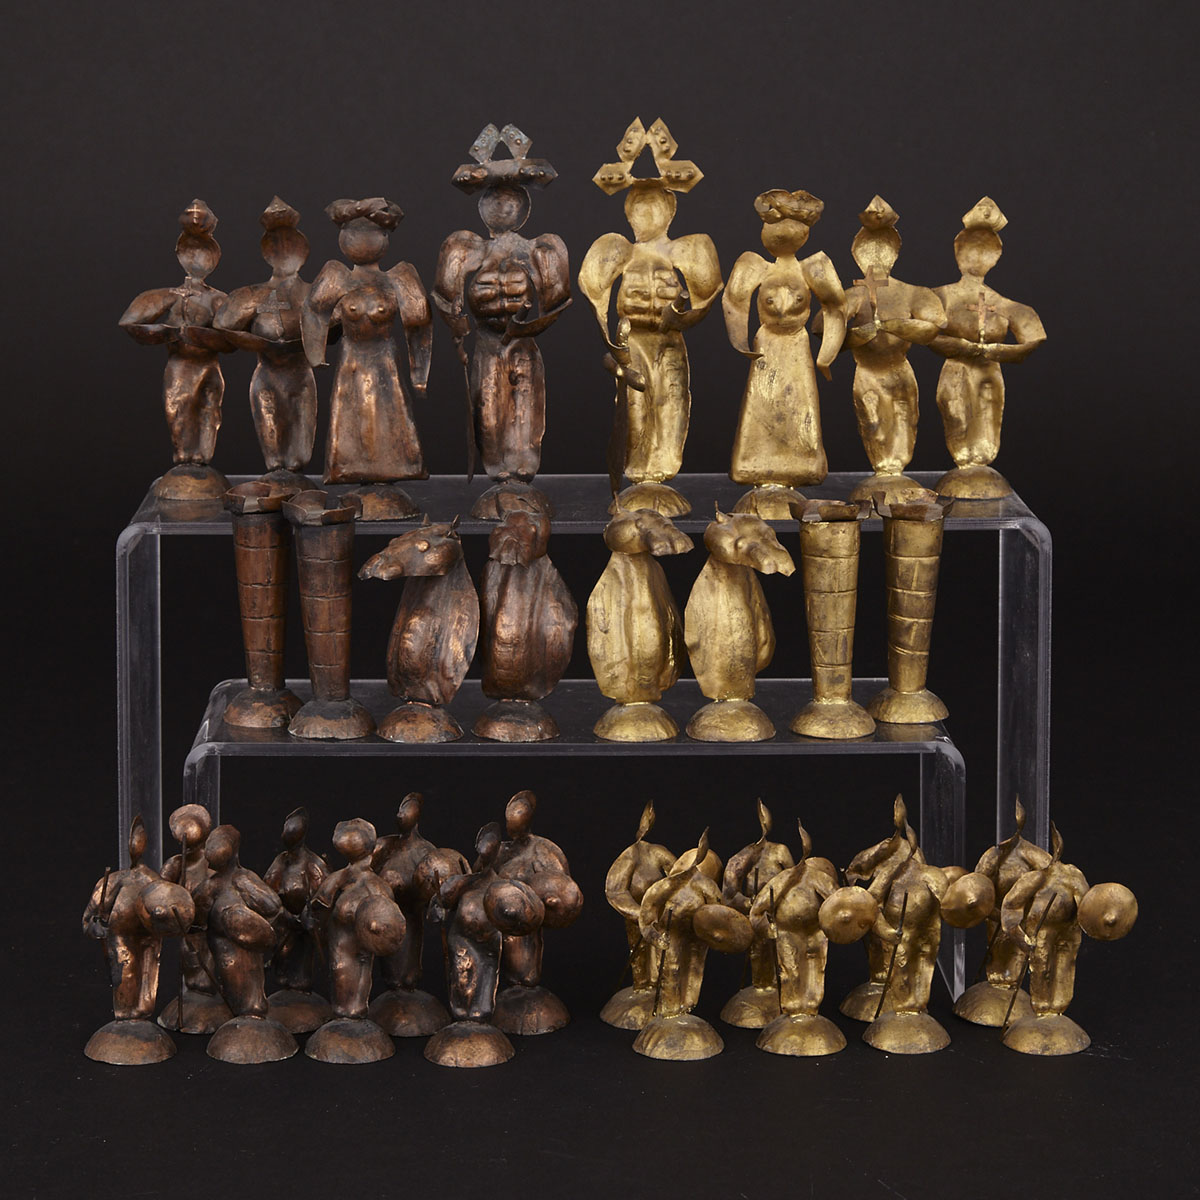 Chilean Hammered Copper and Brass Figural Chess Set, 20th century